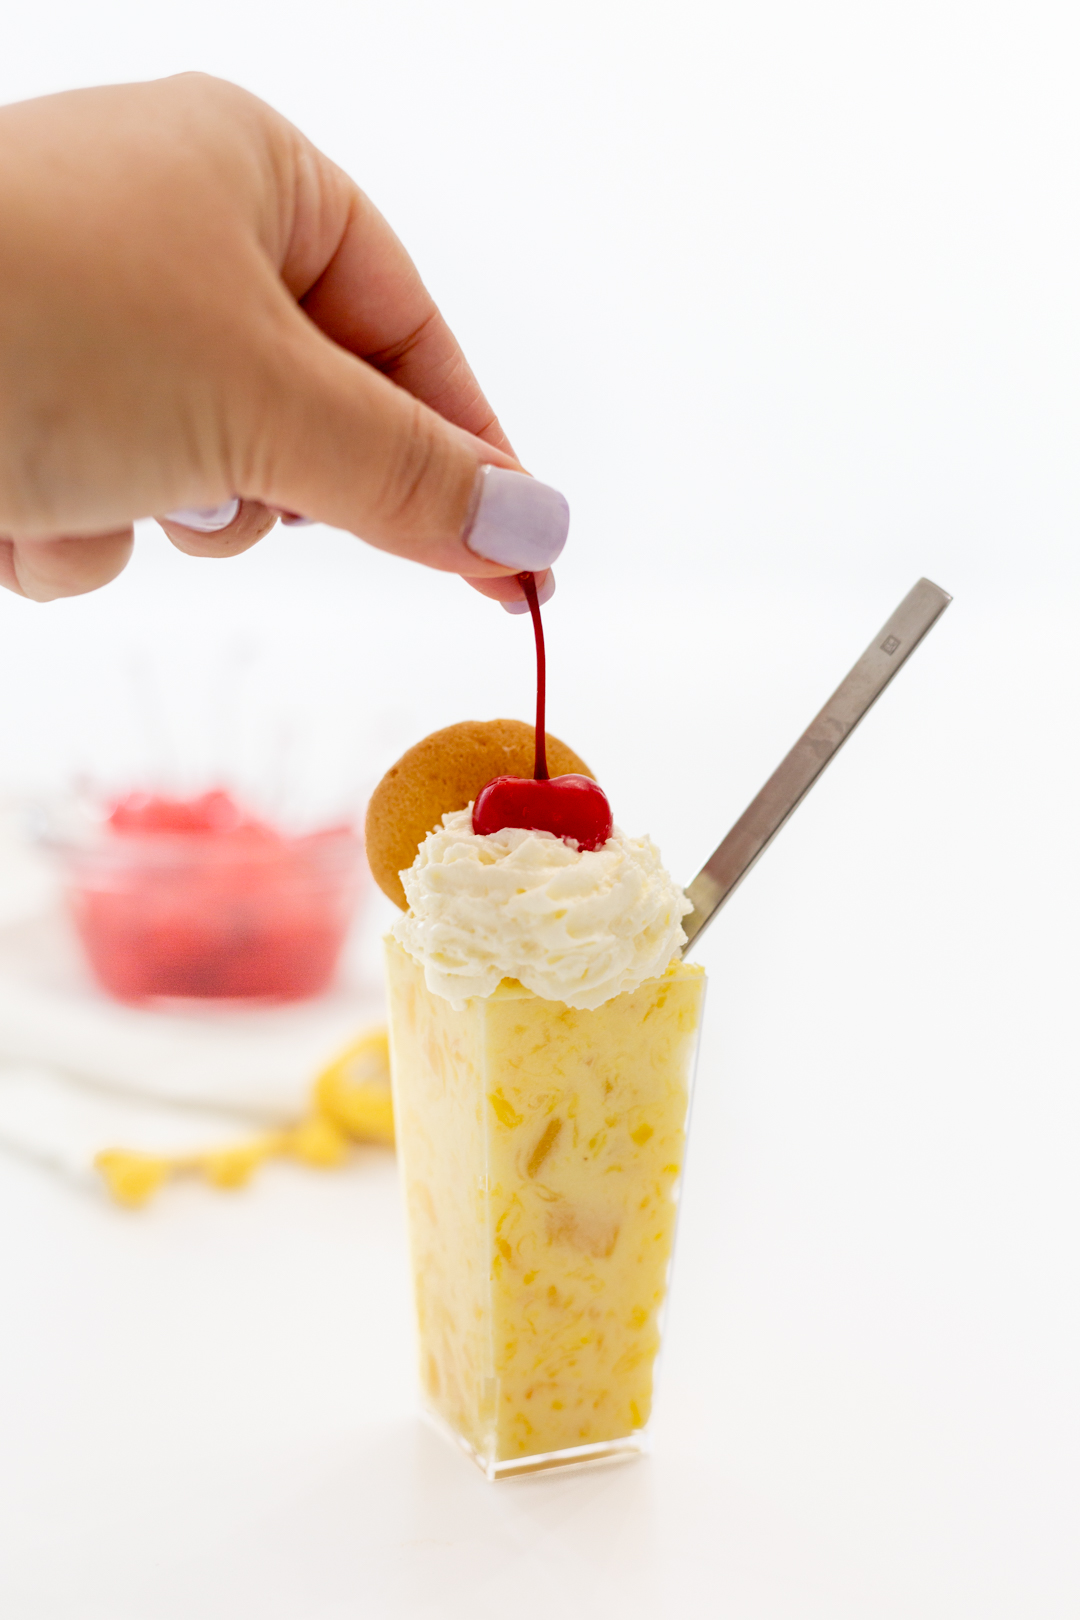 Adding a cherry to pineapple pudding